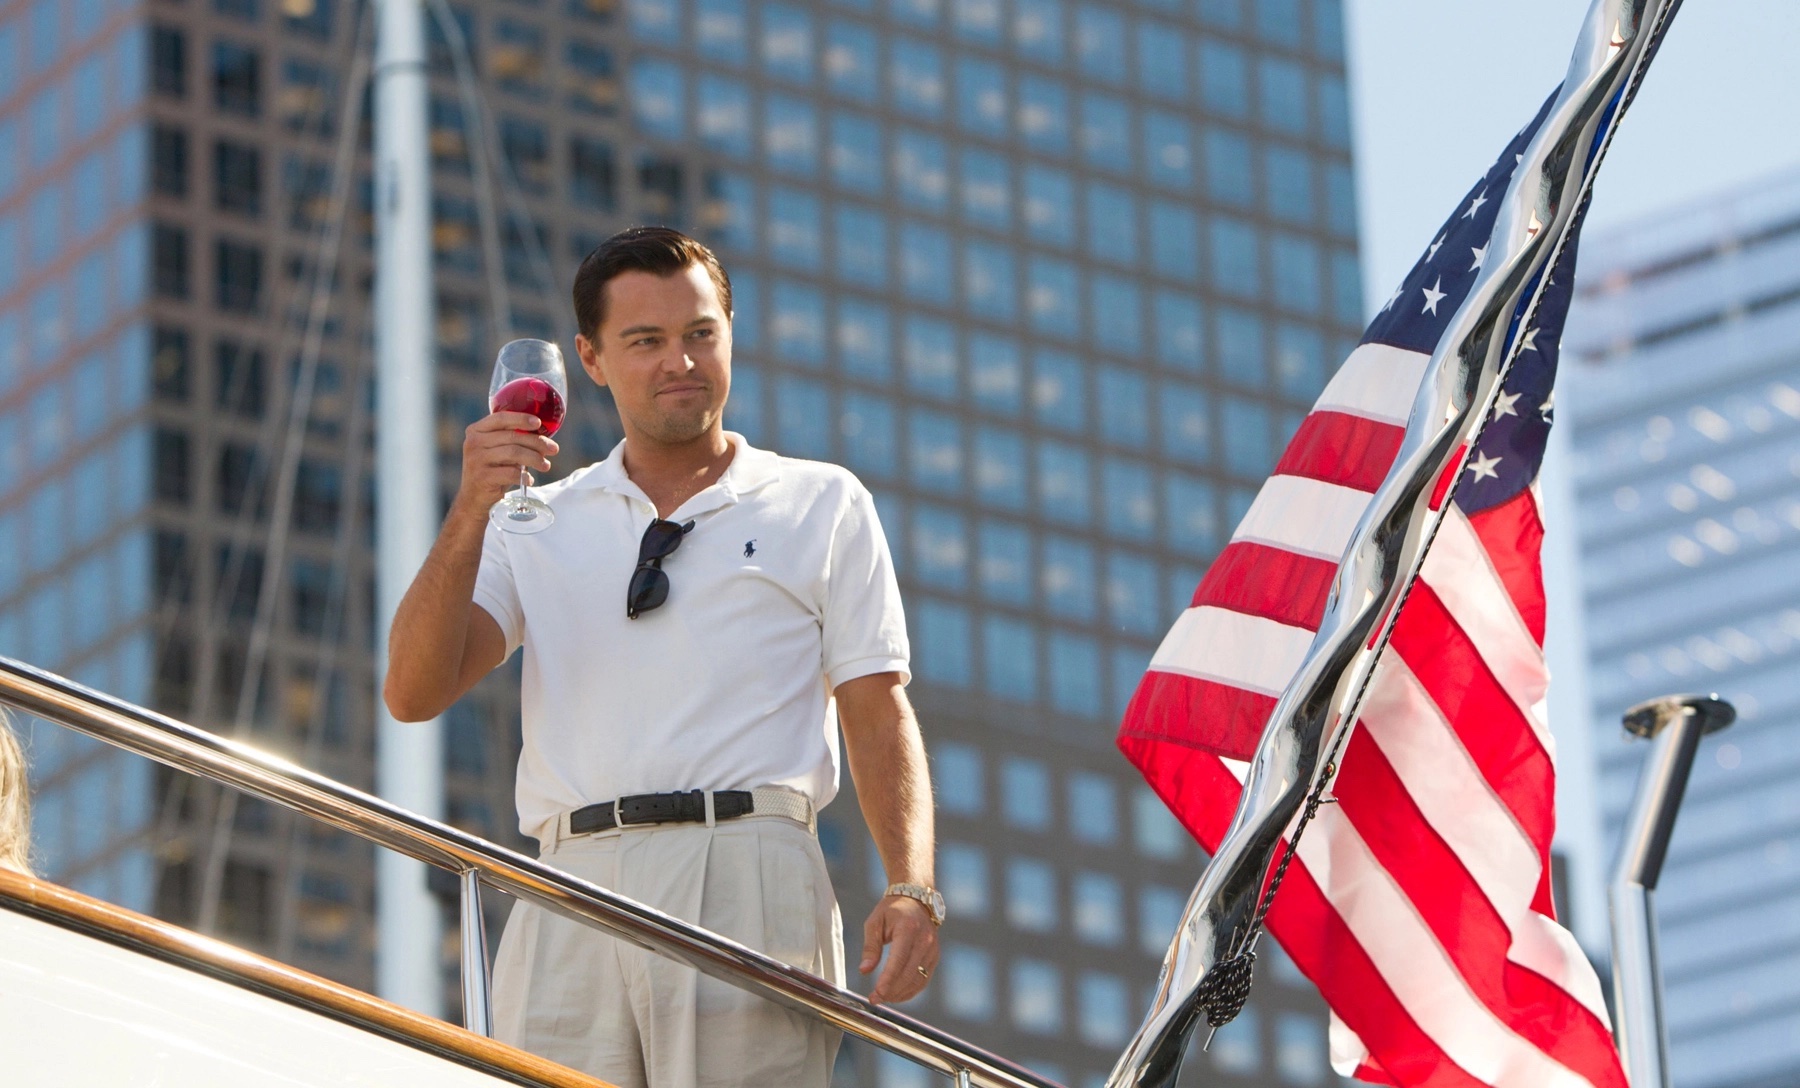 The Wolf of Wall Street Review